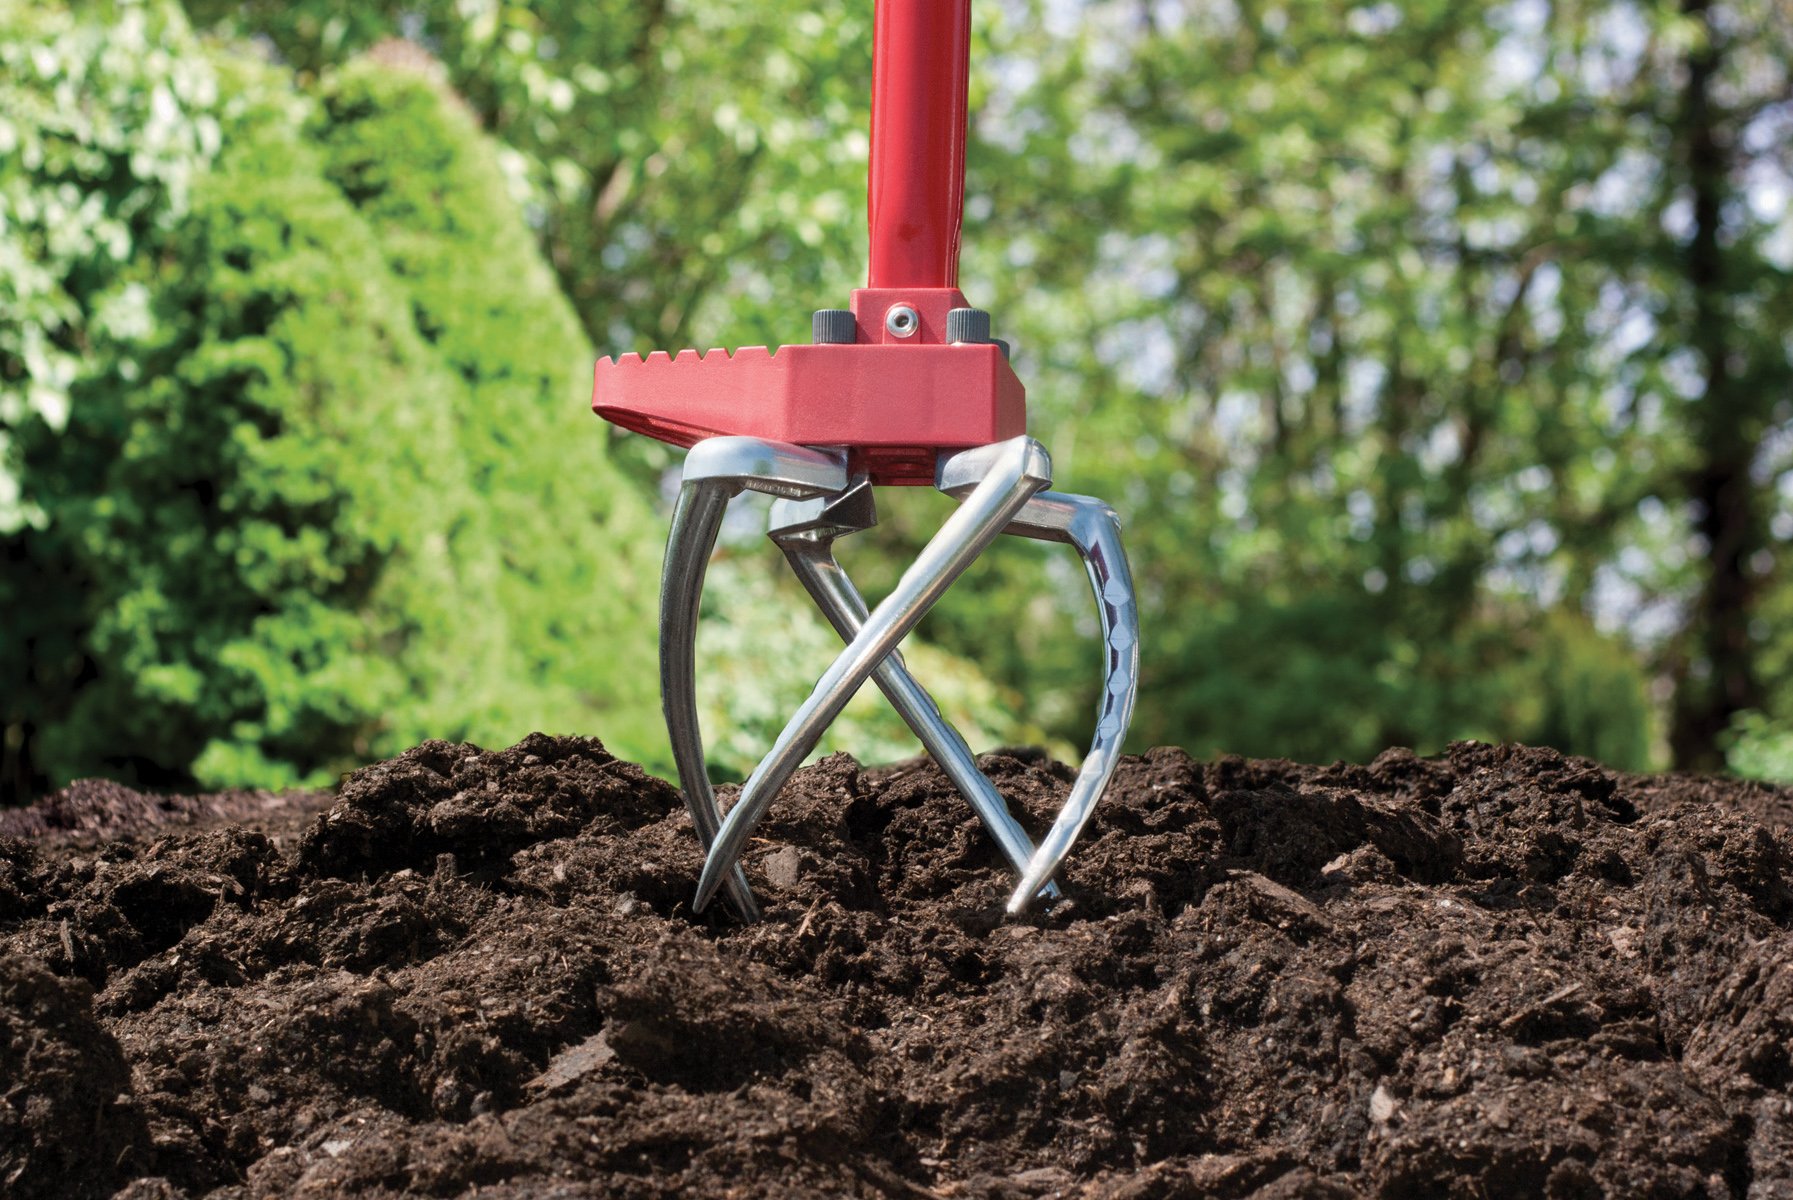 GARDEN WEASEL 91334 Claw Pro - to Cultivate, Loosen, Aerate, Weed, No Bending - Great for Heavy Soil, Weather and Rust Resistant